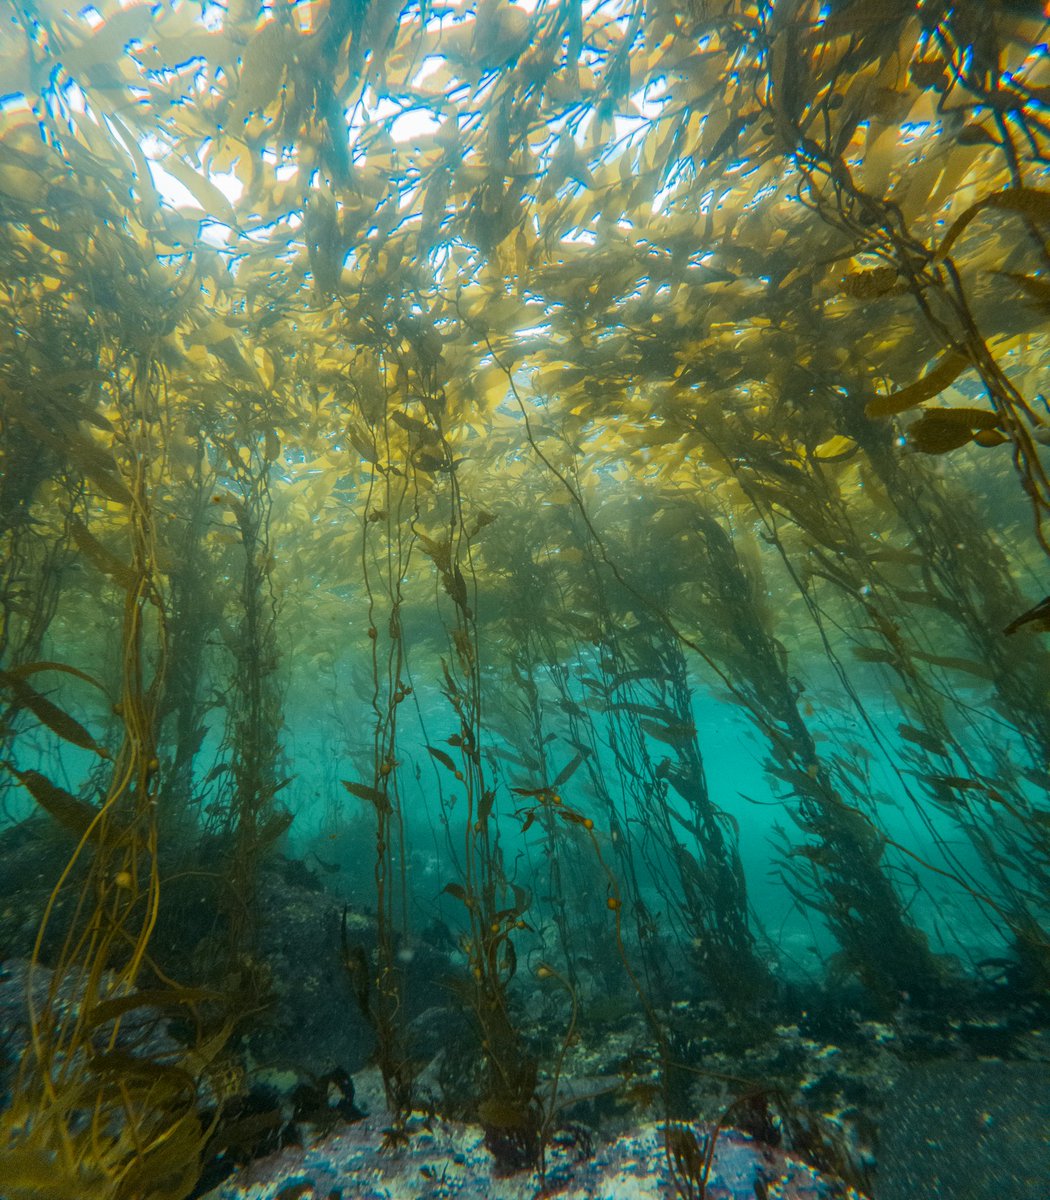 Wrapping up an epic trip to study carbon flows in Patagonian kelp forests, some of the last pristine marine forests on 🌍. A great collaboration between @ConservationOrg @CentroIDEAL_CL!  Thanks for showing me around Iván,
@mpalaciossubiab, @DosmanSch & Jaime 😃 

📸IG @Jaime_flb